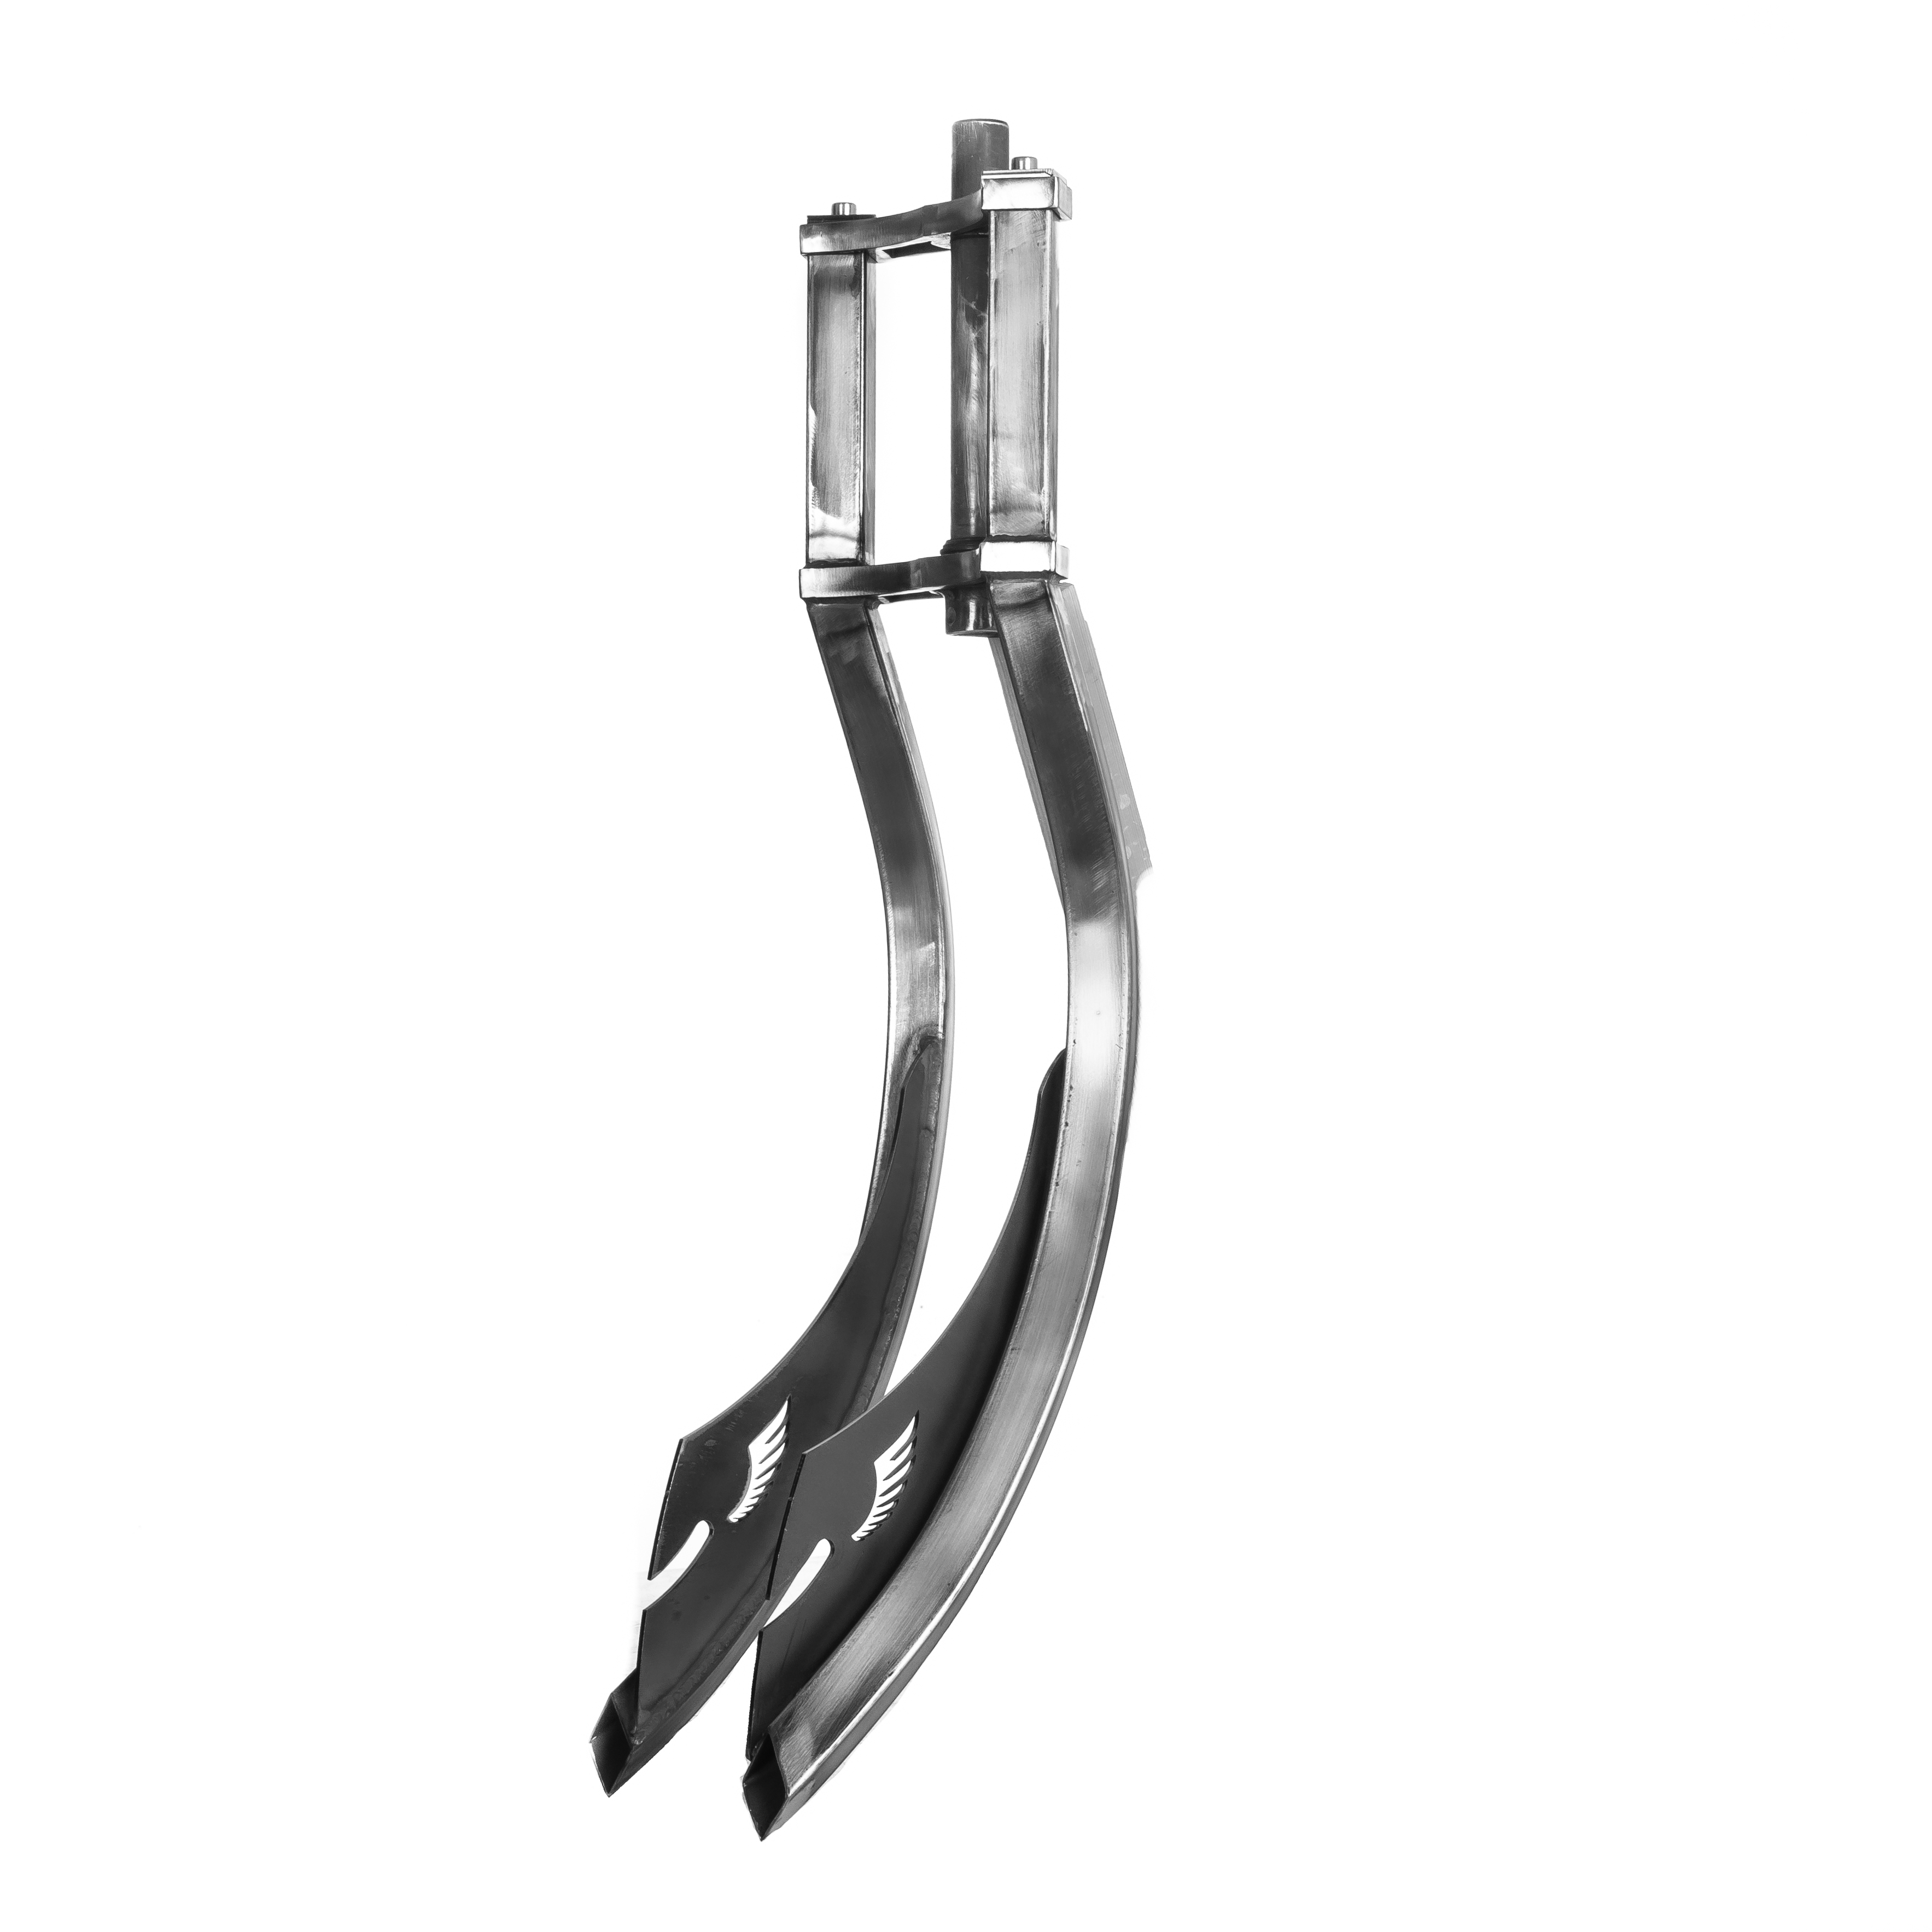 Blade Fork ALCB double crown, double down raw 1 1/8